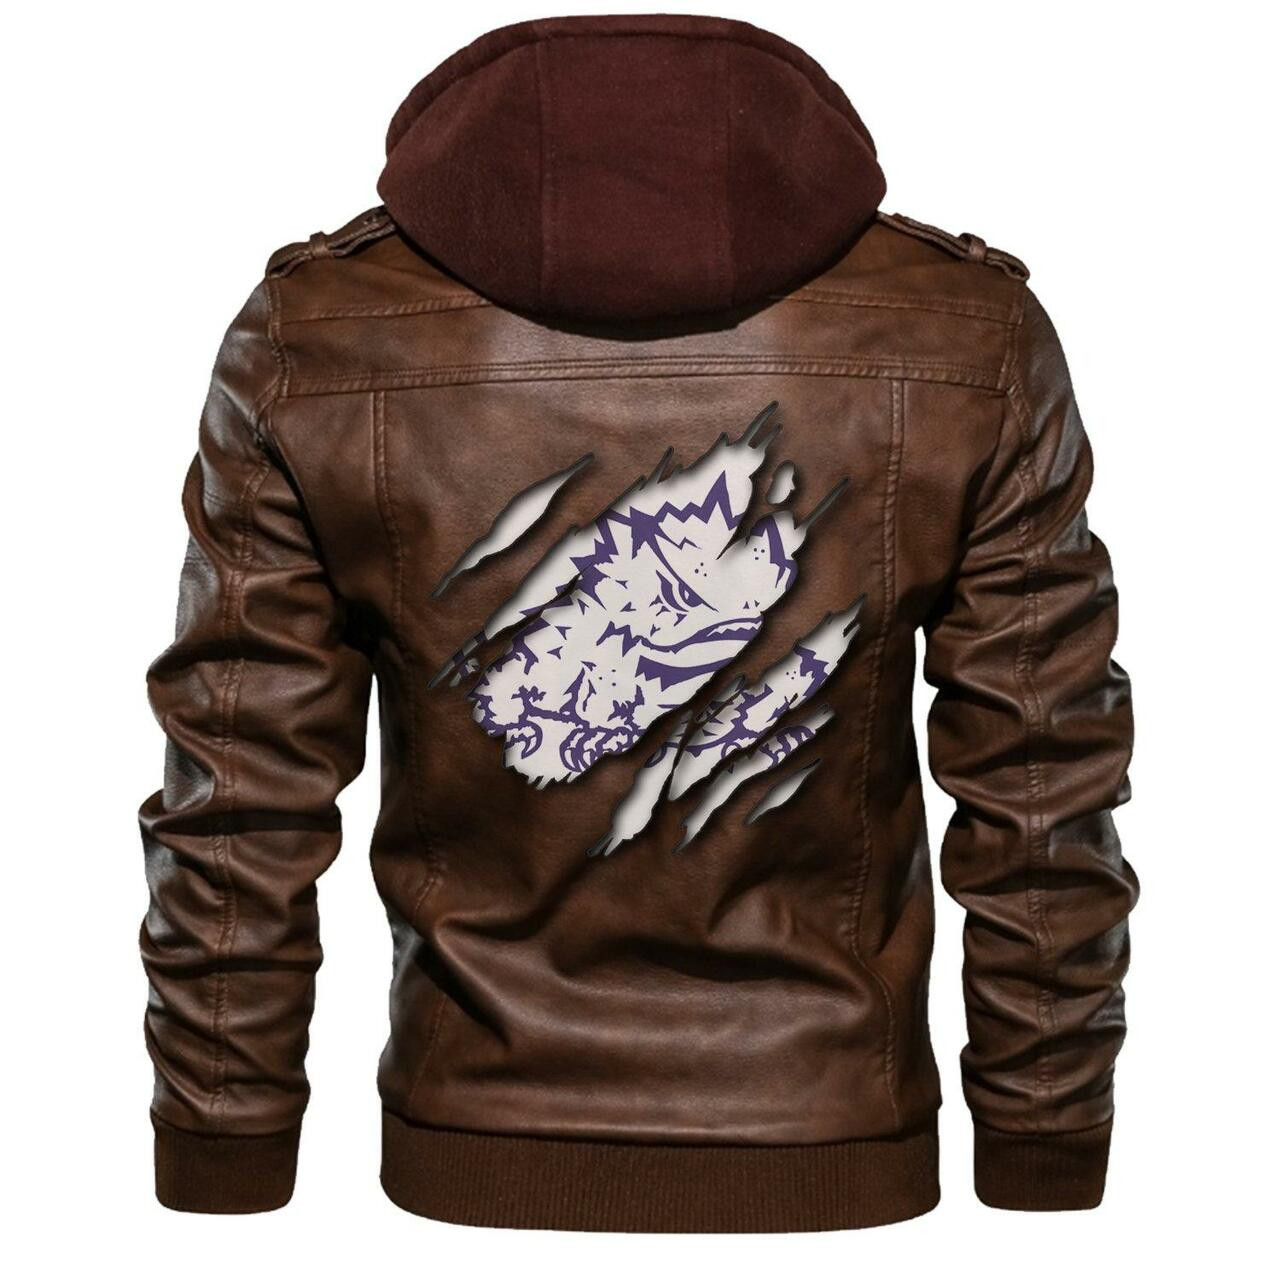 This leather Jacket will look great on you and make you stand out from the crowd 187